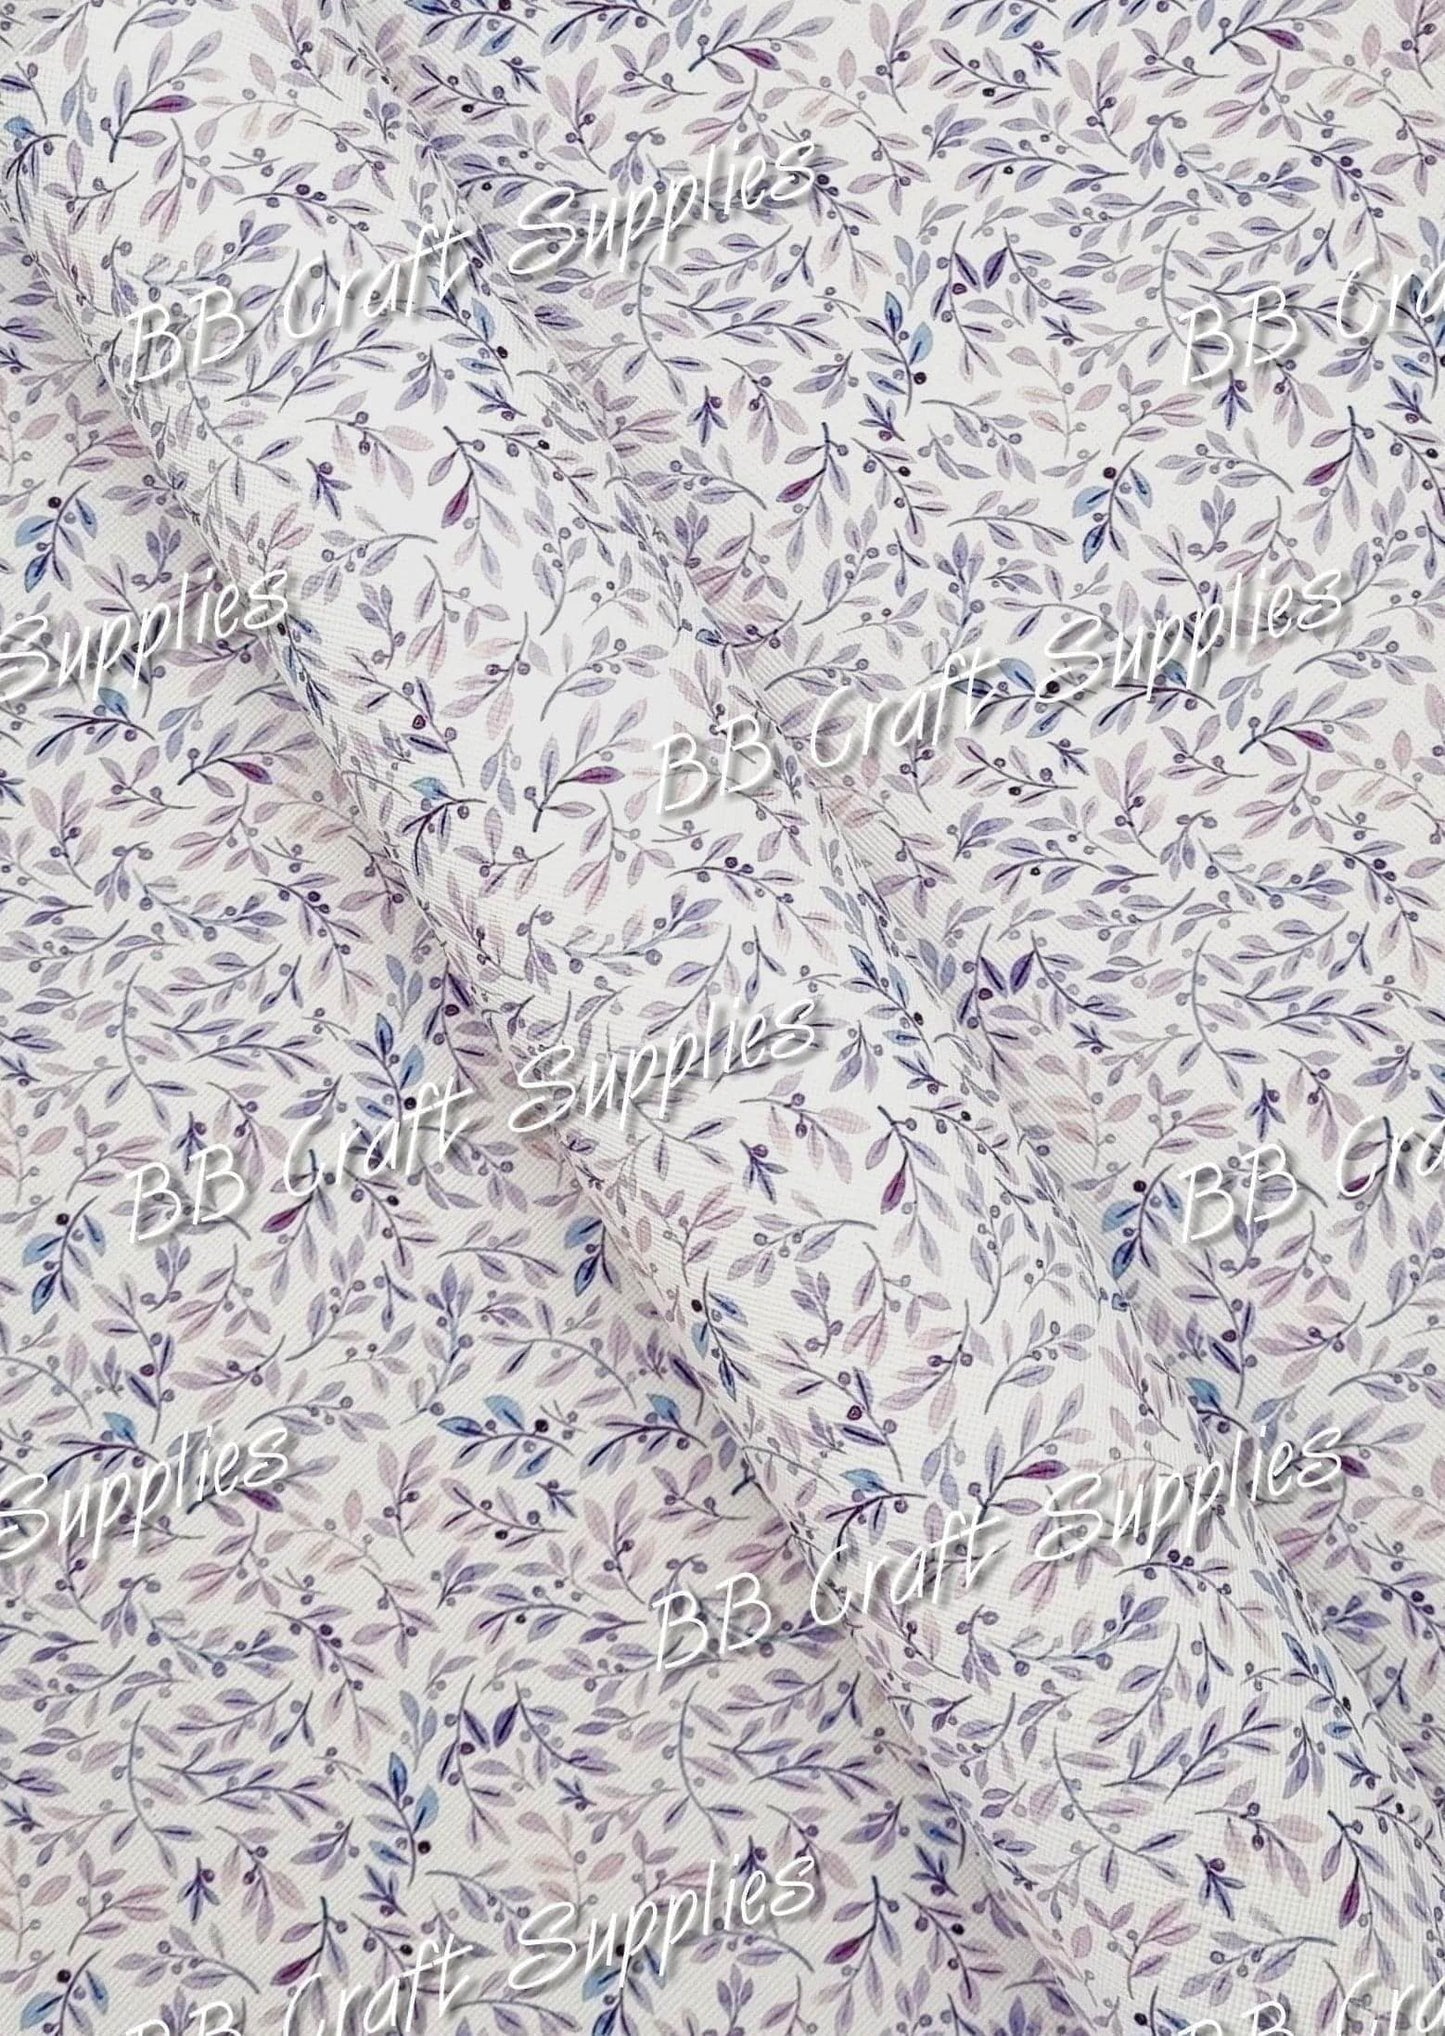 Morning Glory Faux Leather - Faux, Faux Leather, floral, flowers, Leather, leatherette, Morning Glory. - Bare Butler Faux Leather Supplies 